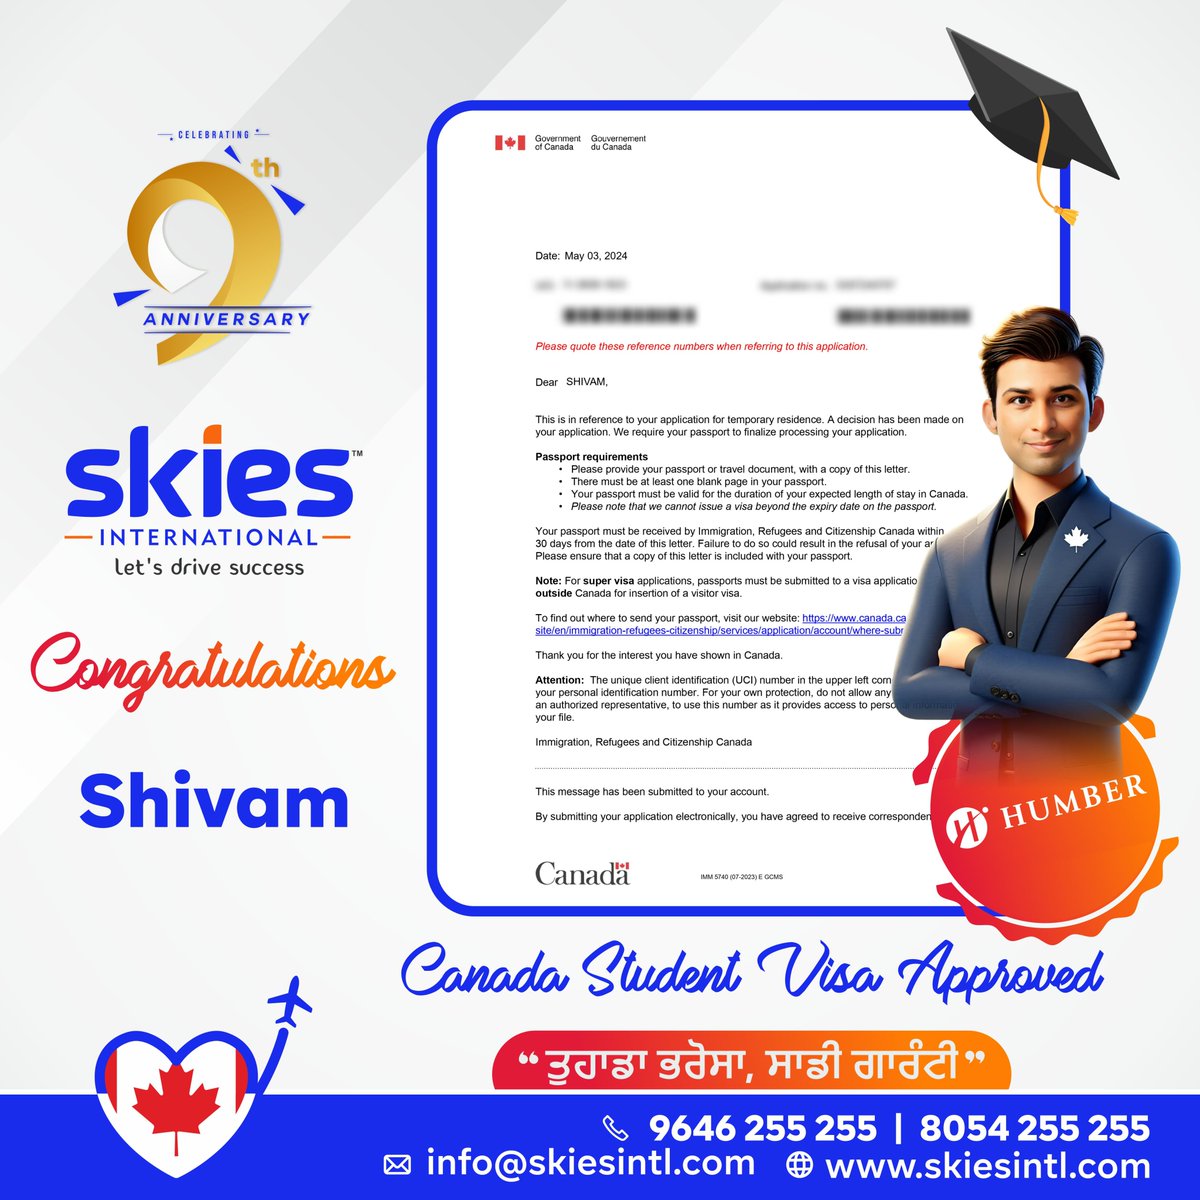 🎉Big news from Skies International Pvt. Ltd.!✈️

Our star student, Shivam, has just secured his student visa for Humber College, Canada!

#StudyAbroad #VisaSuccess #SkiesInternational #HumberCollege